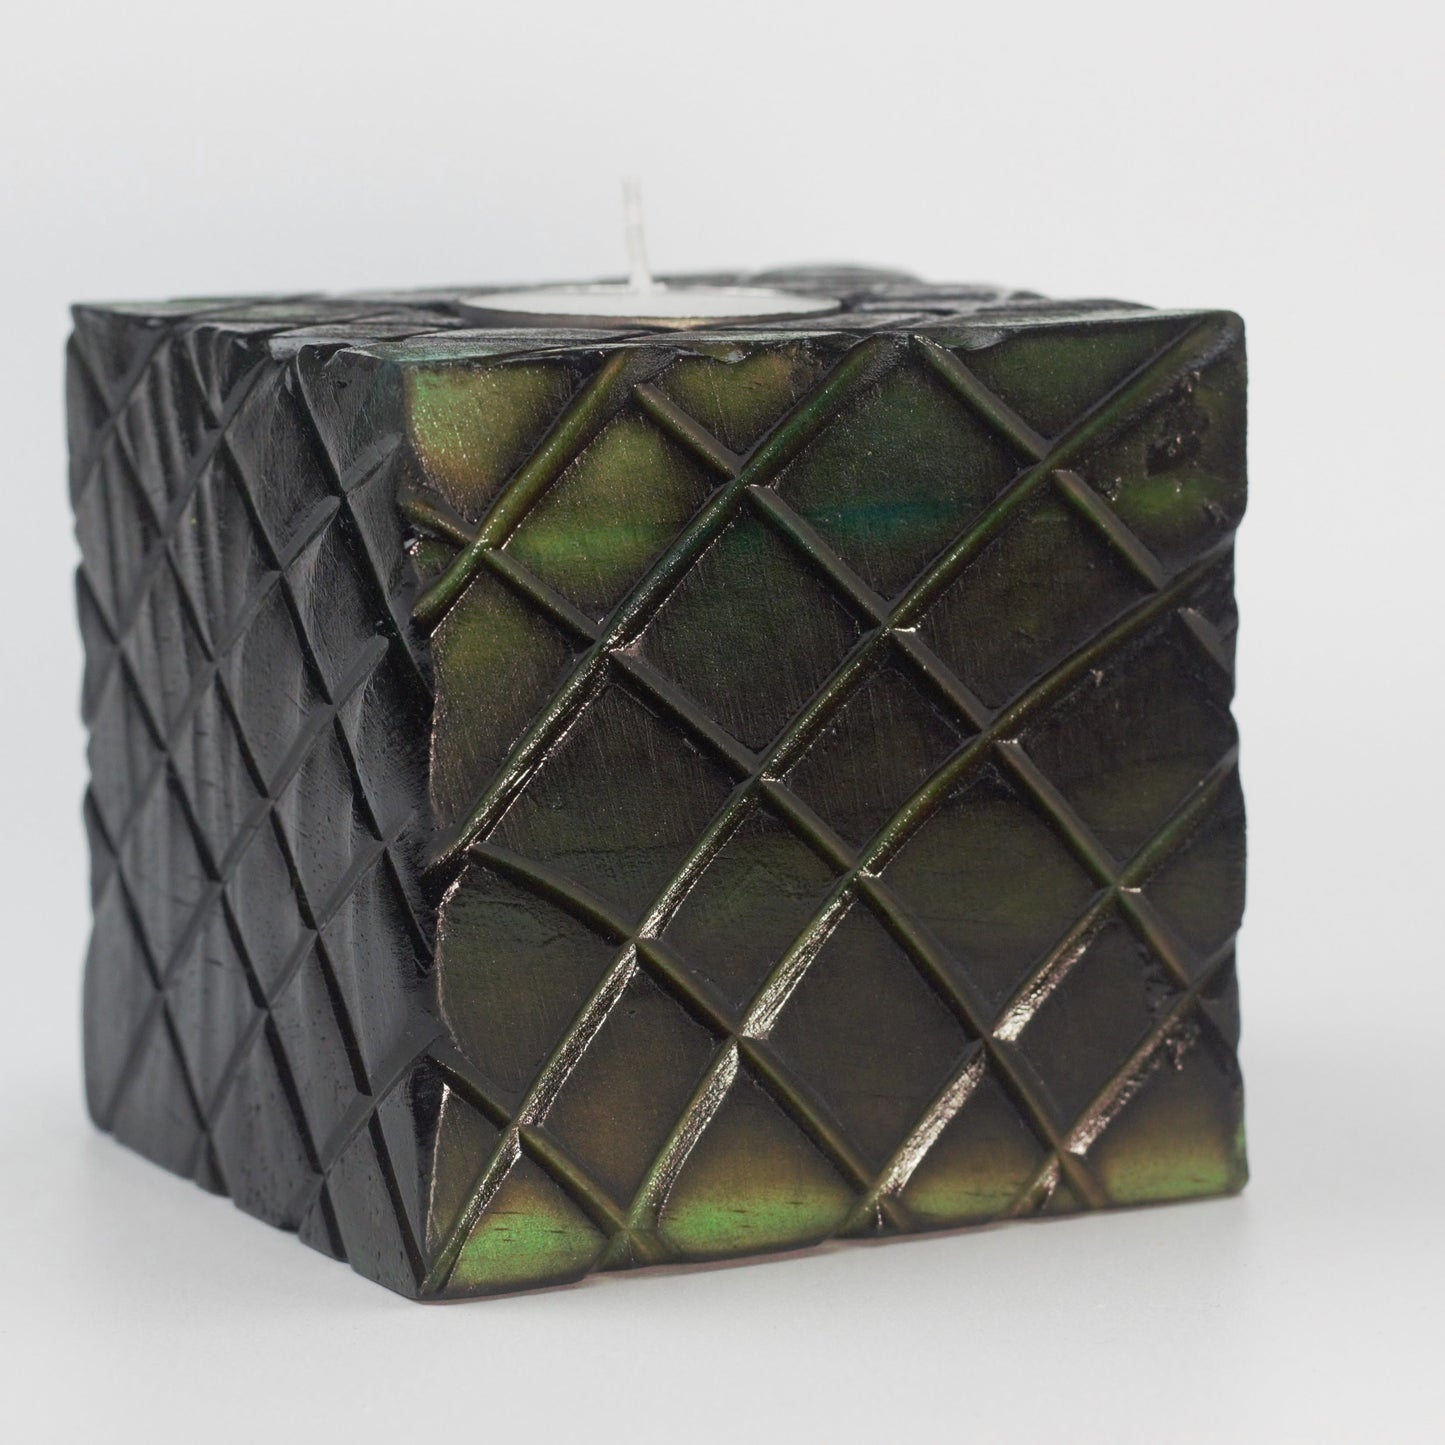 green wooden square candle holder with diagonal lines etched to resemble dragon scales. Containing a white tea light candle, on a white background